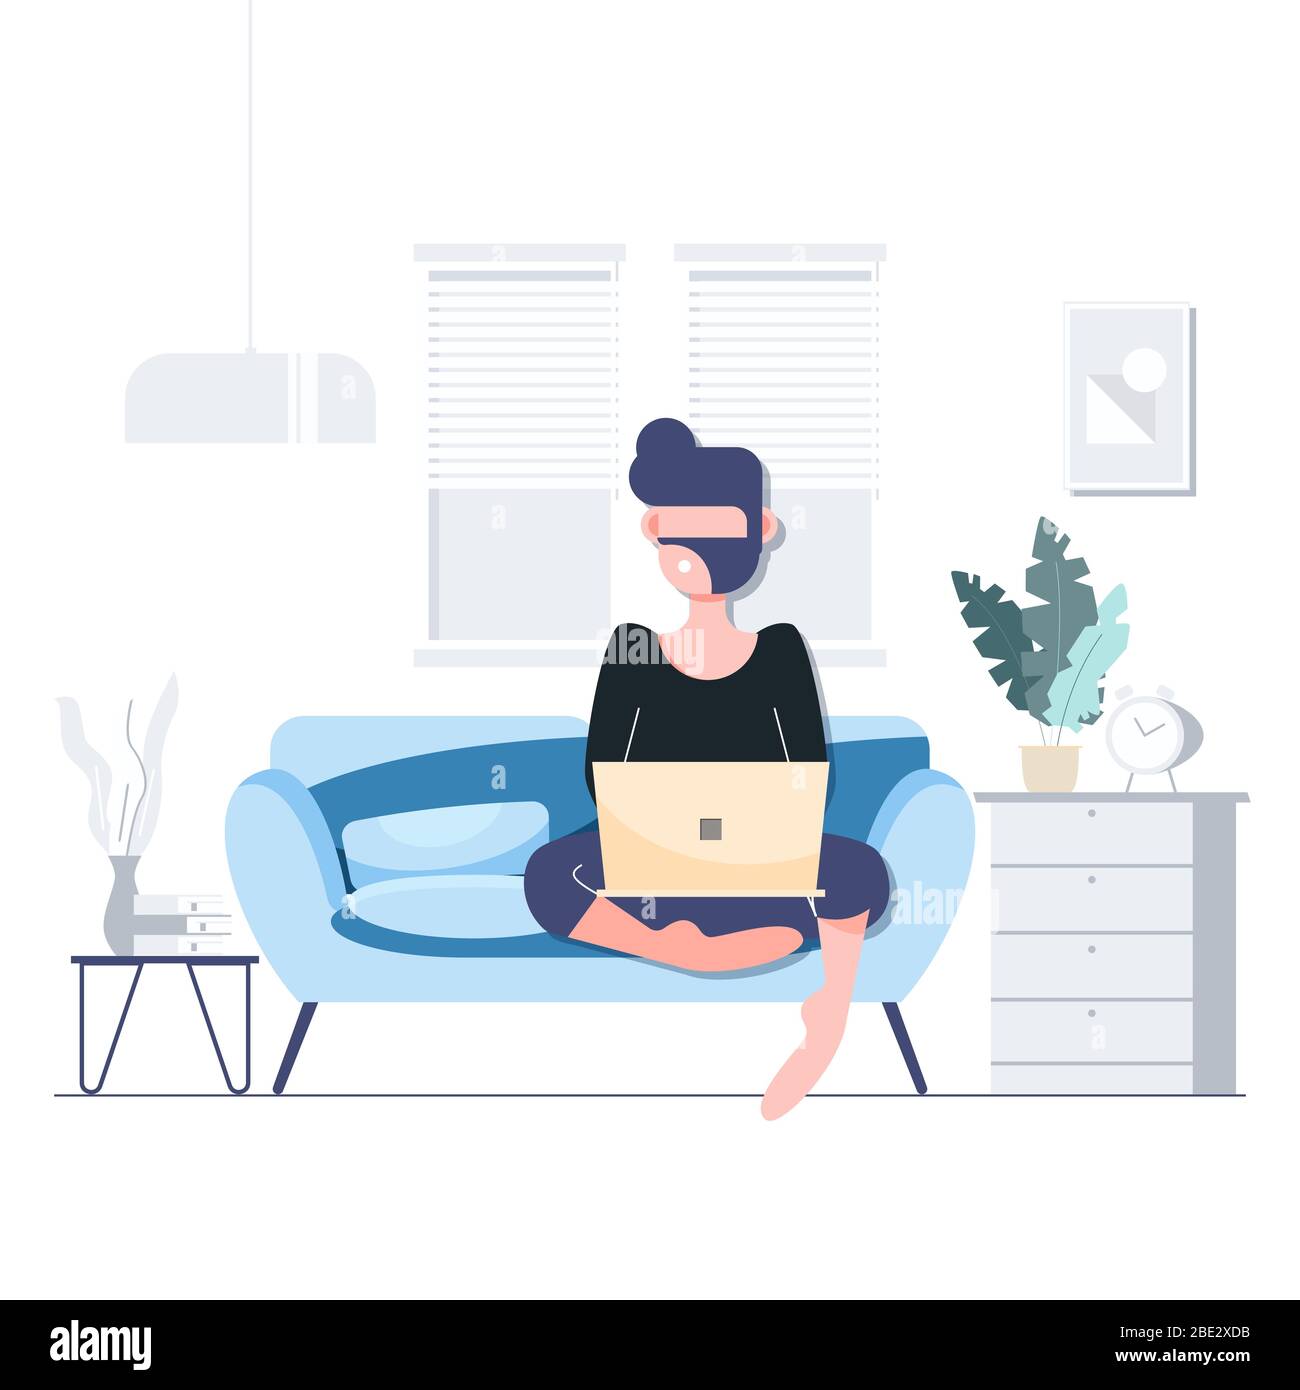 Work from home stay at home quarantine social distancing concept. Lockdown Covid-19 coronavirus outbreak. Digital transformation. Flat character abstr Stock Vector